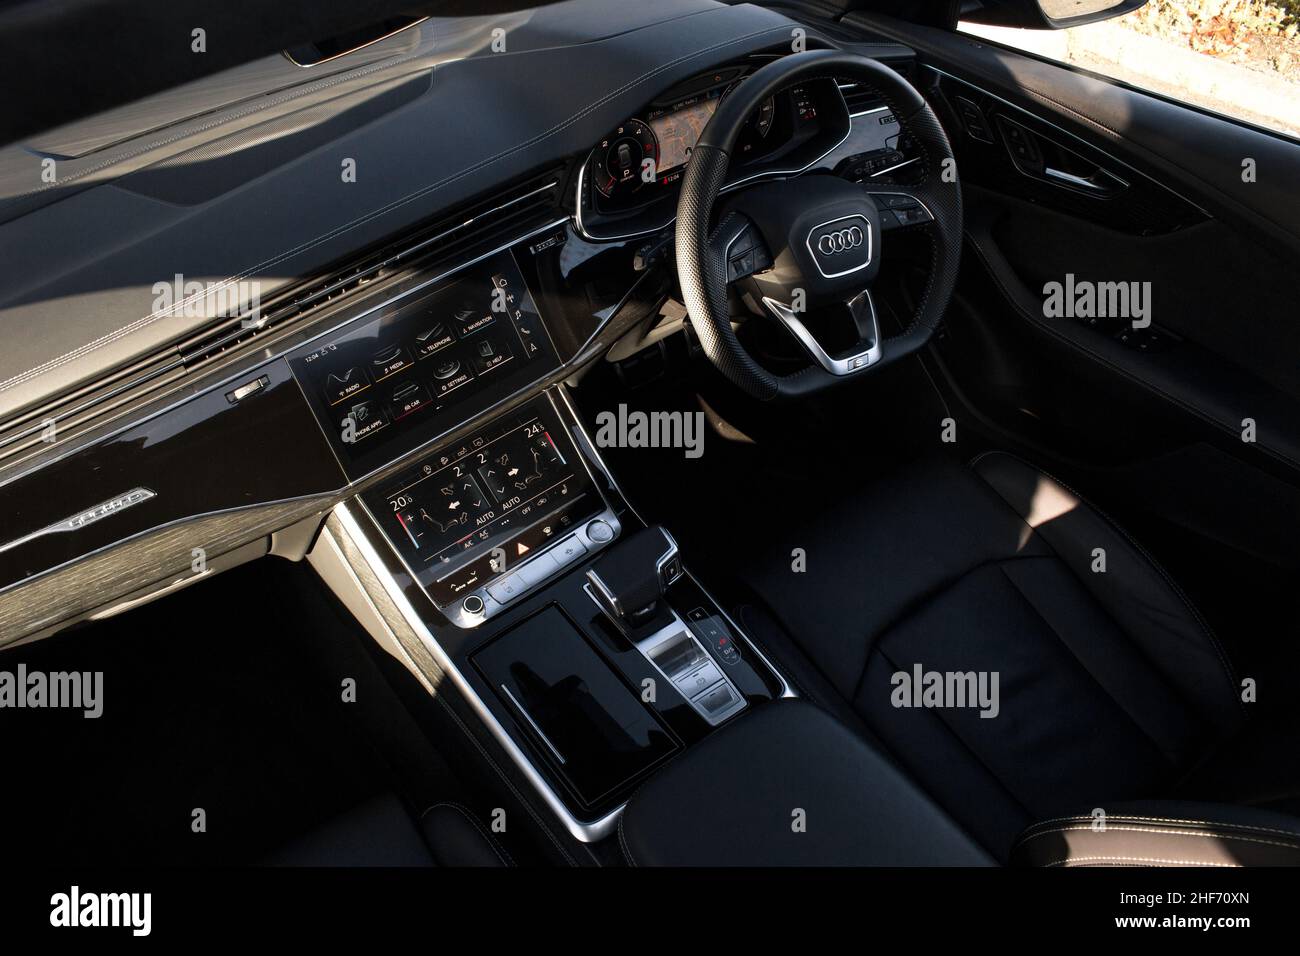 A 2019 Audi Q8 With Black  Leather Multi Function Steering Wheel With Digital Dashboard With Touch Screen Centre Console Stock Photo